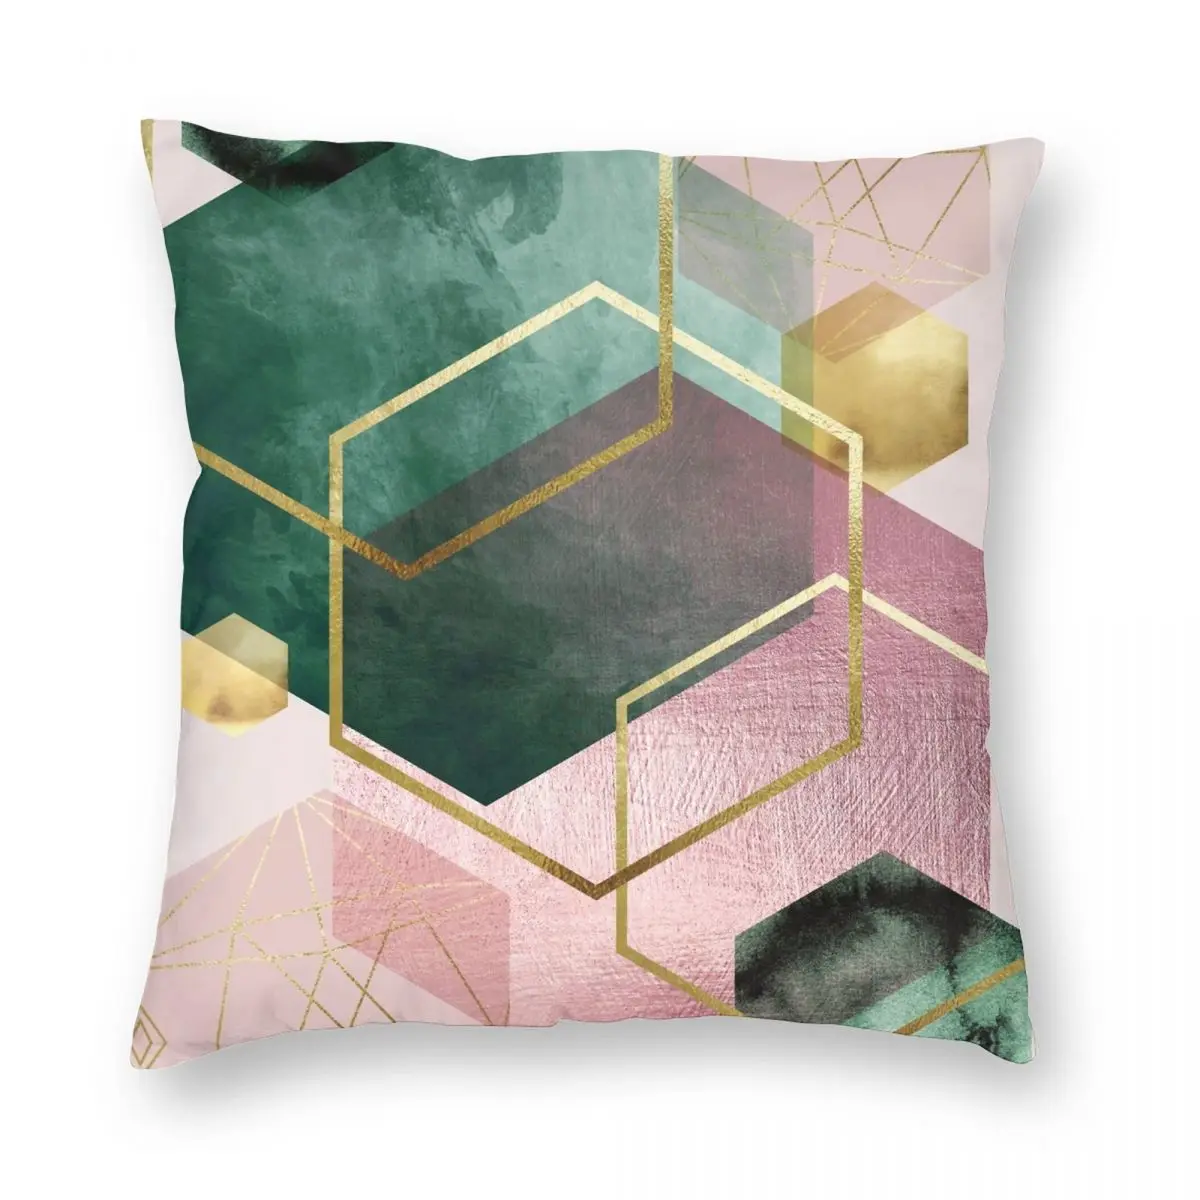 

Emerald Green And Pink Geo No 1 Square Pillowcase Polyester Linen Velvet Pattern Zip Decorative Bed Cushion Cover Wholesale